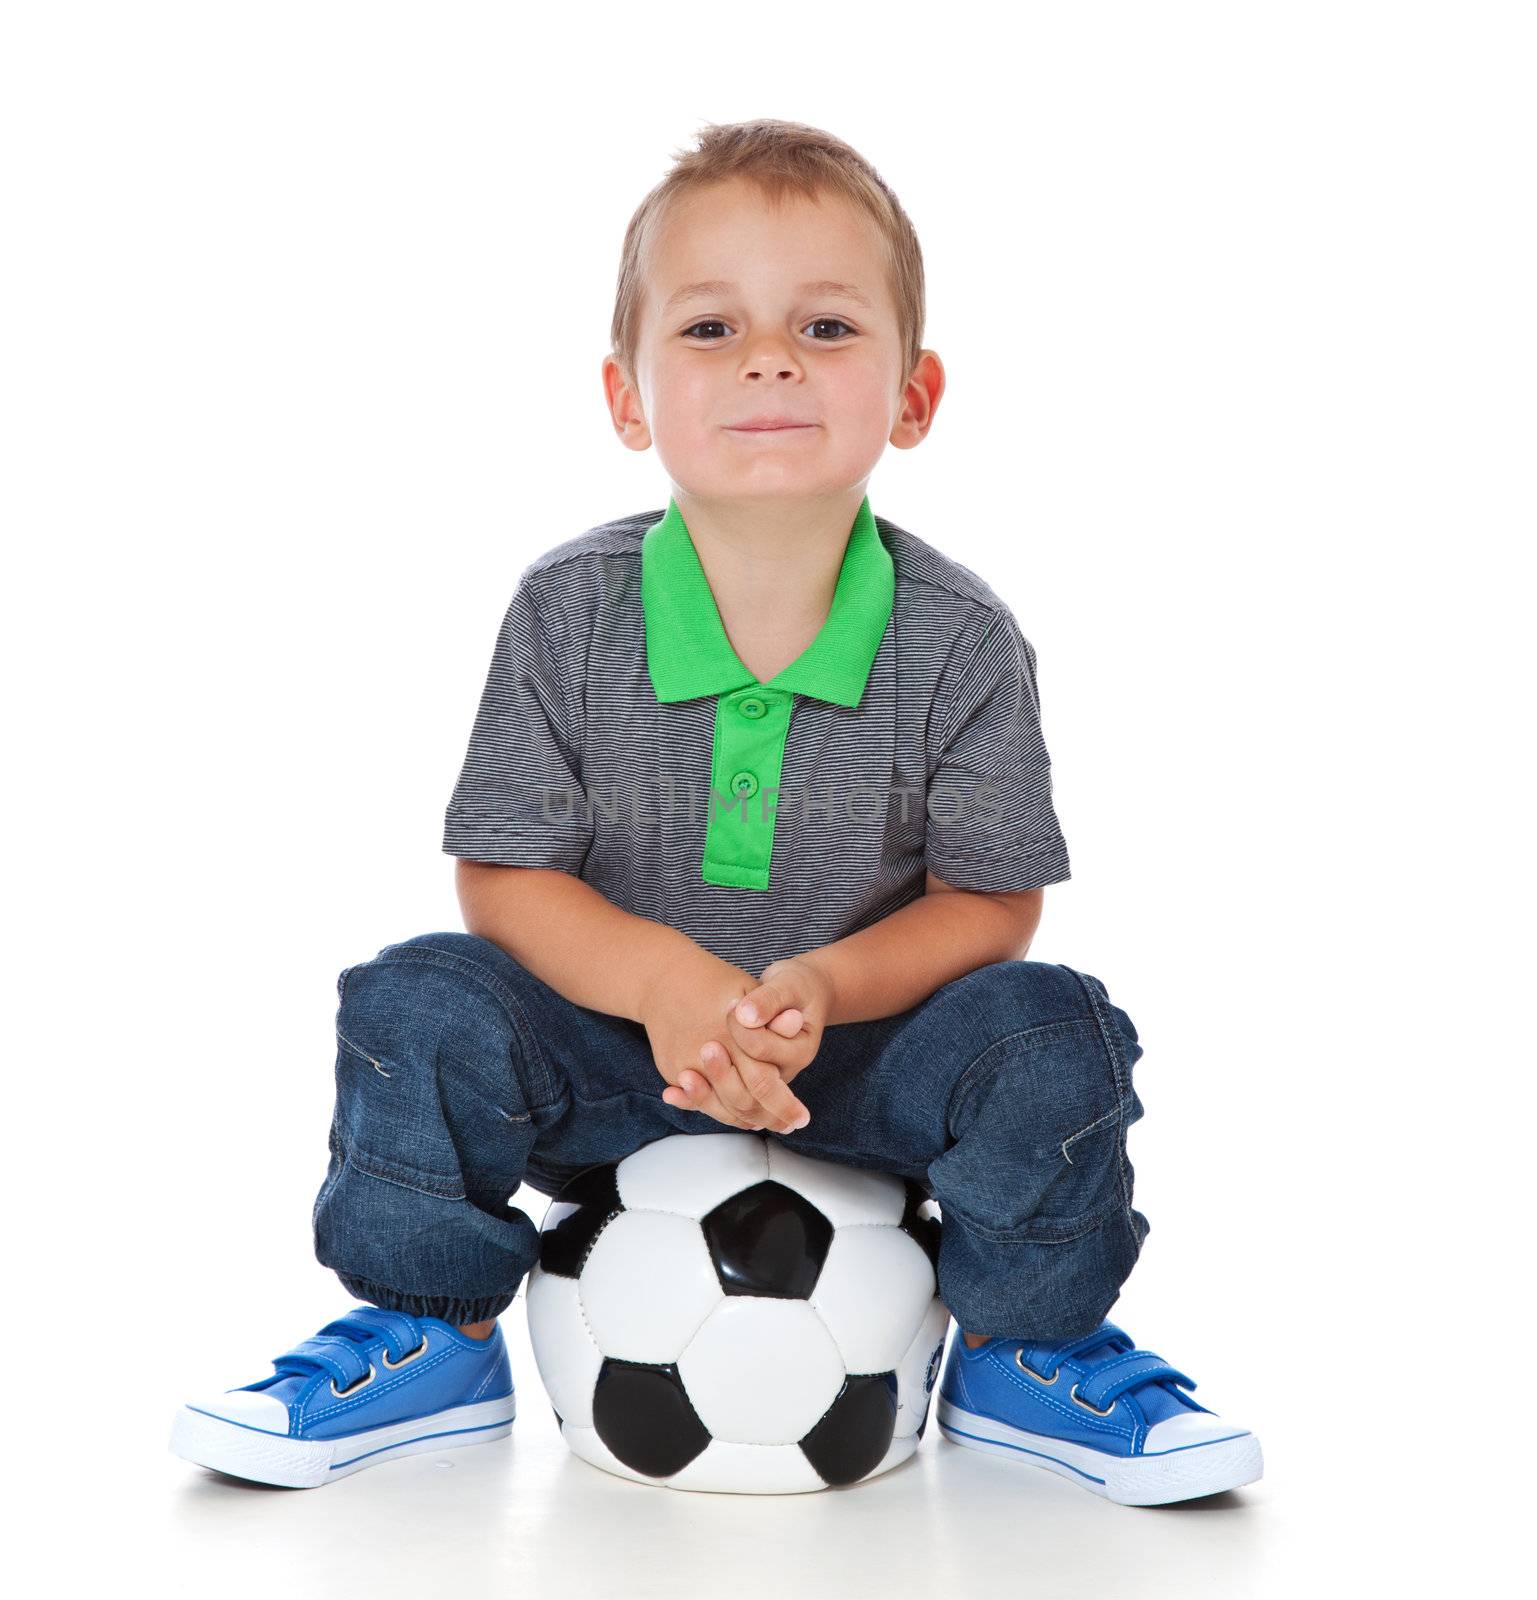 Boy sitting at soccer ball by kaarsten